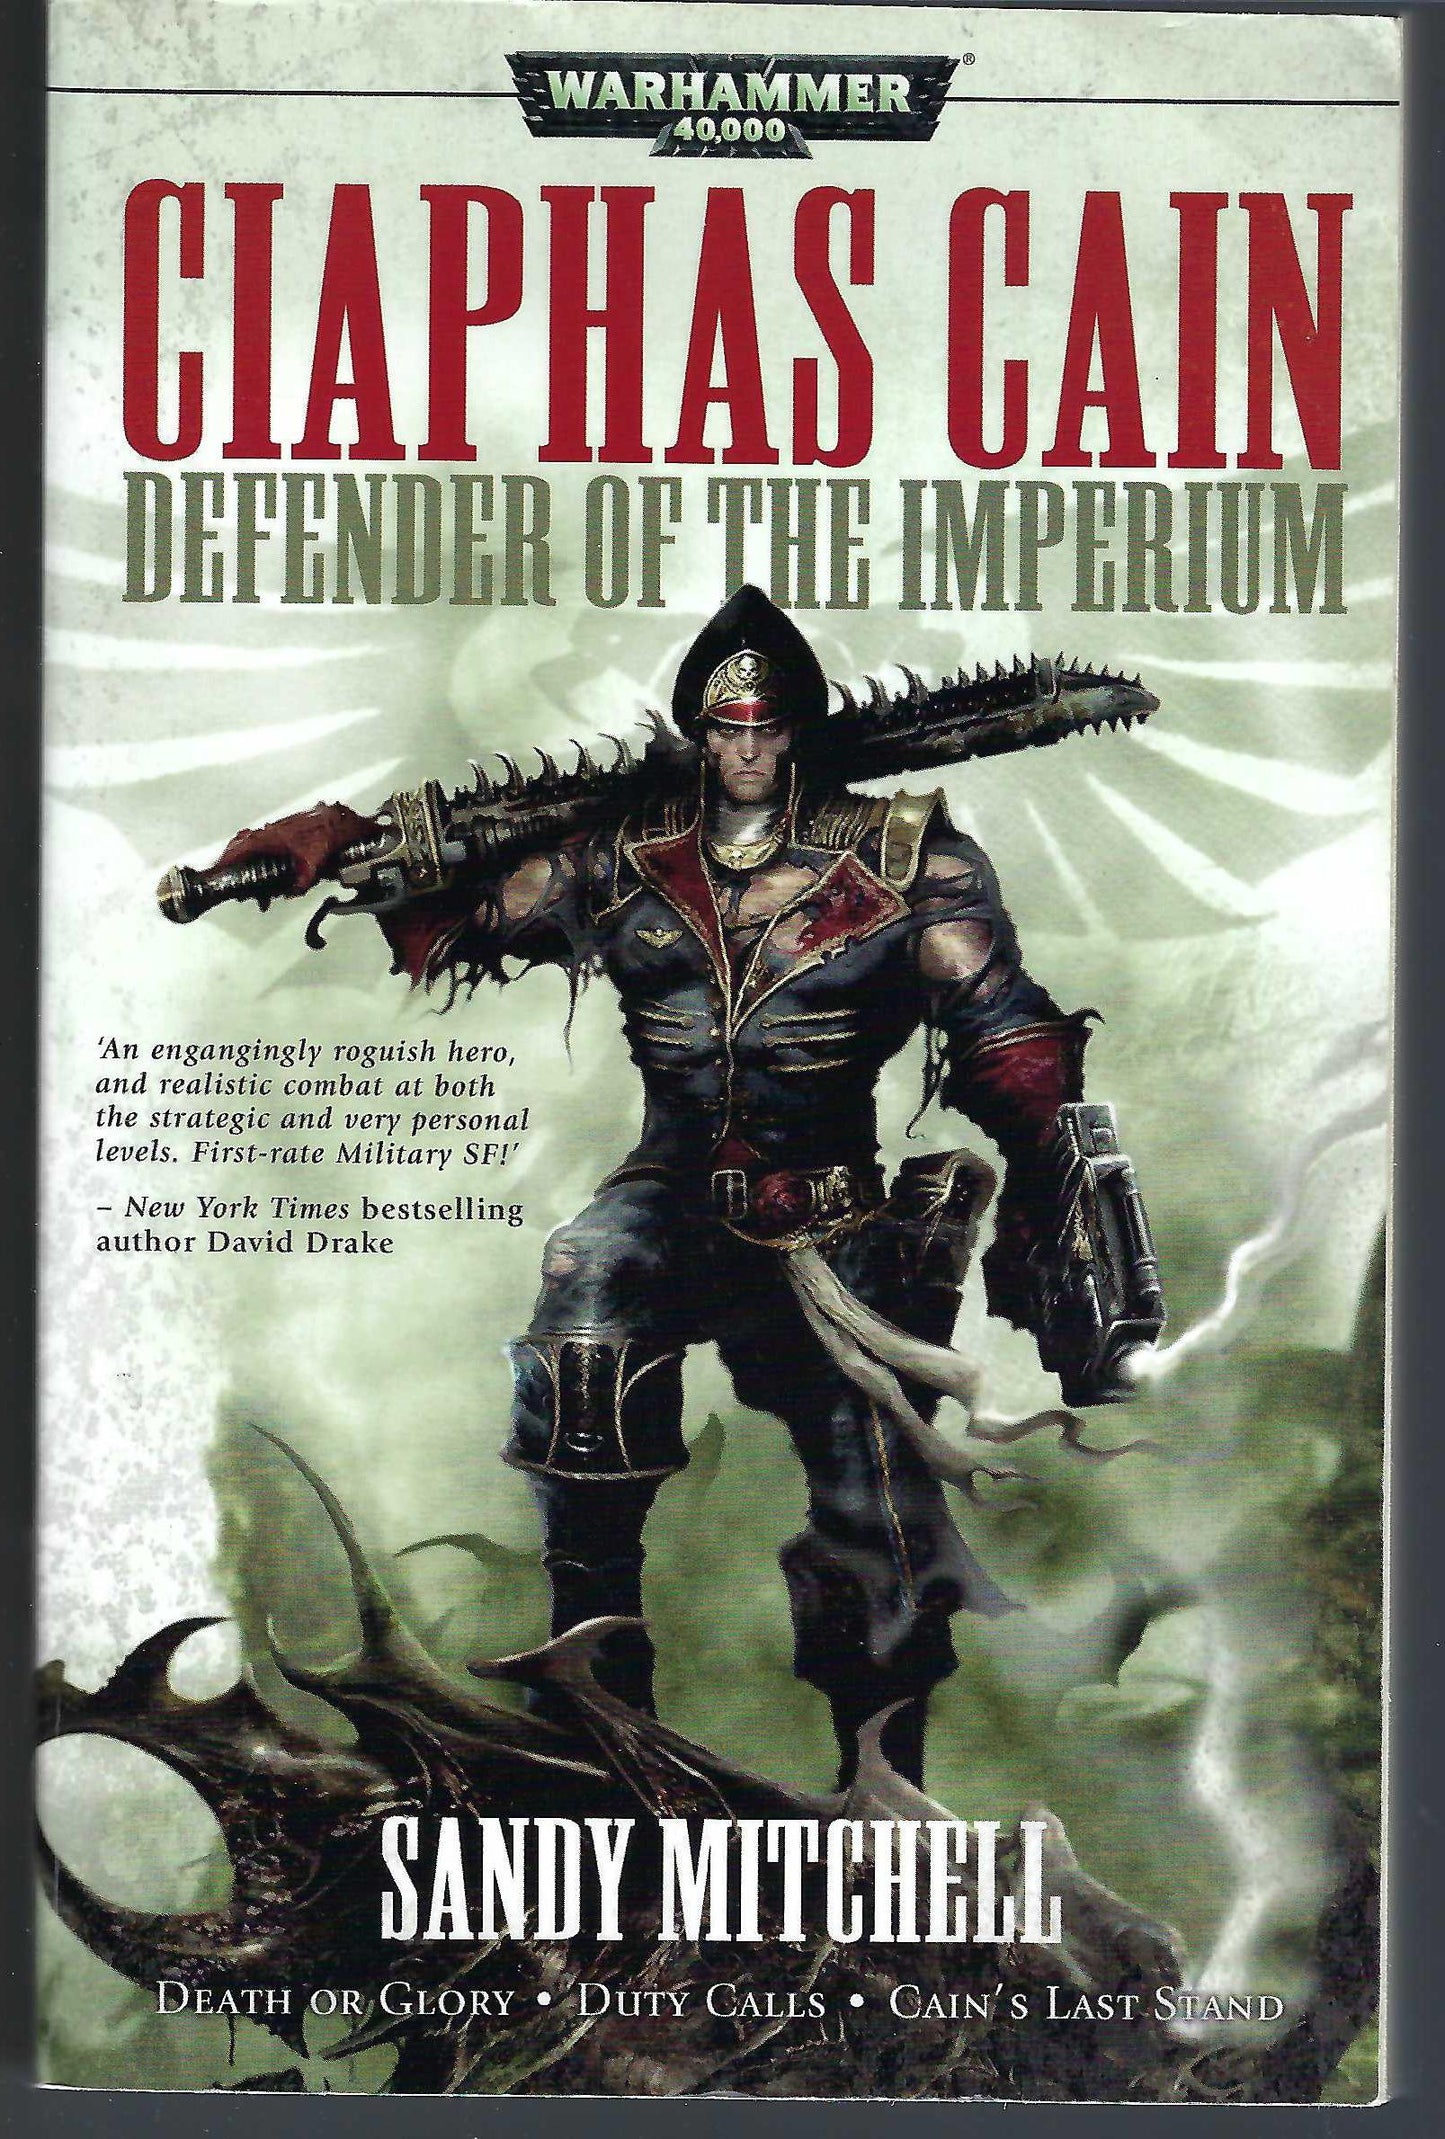 Ciaphas Cain Defender of the Imperium front cover